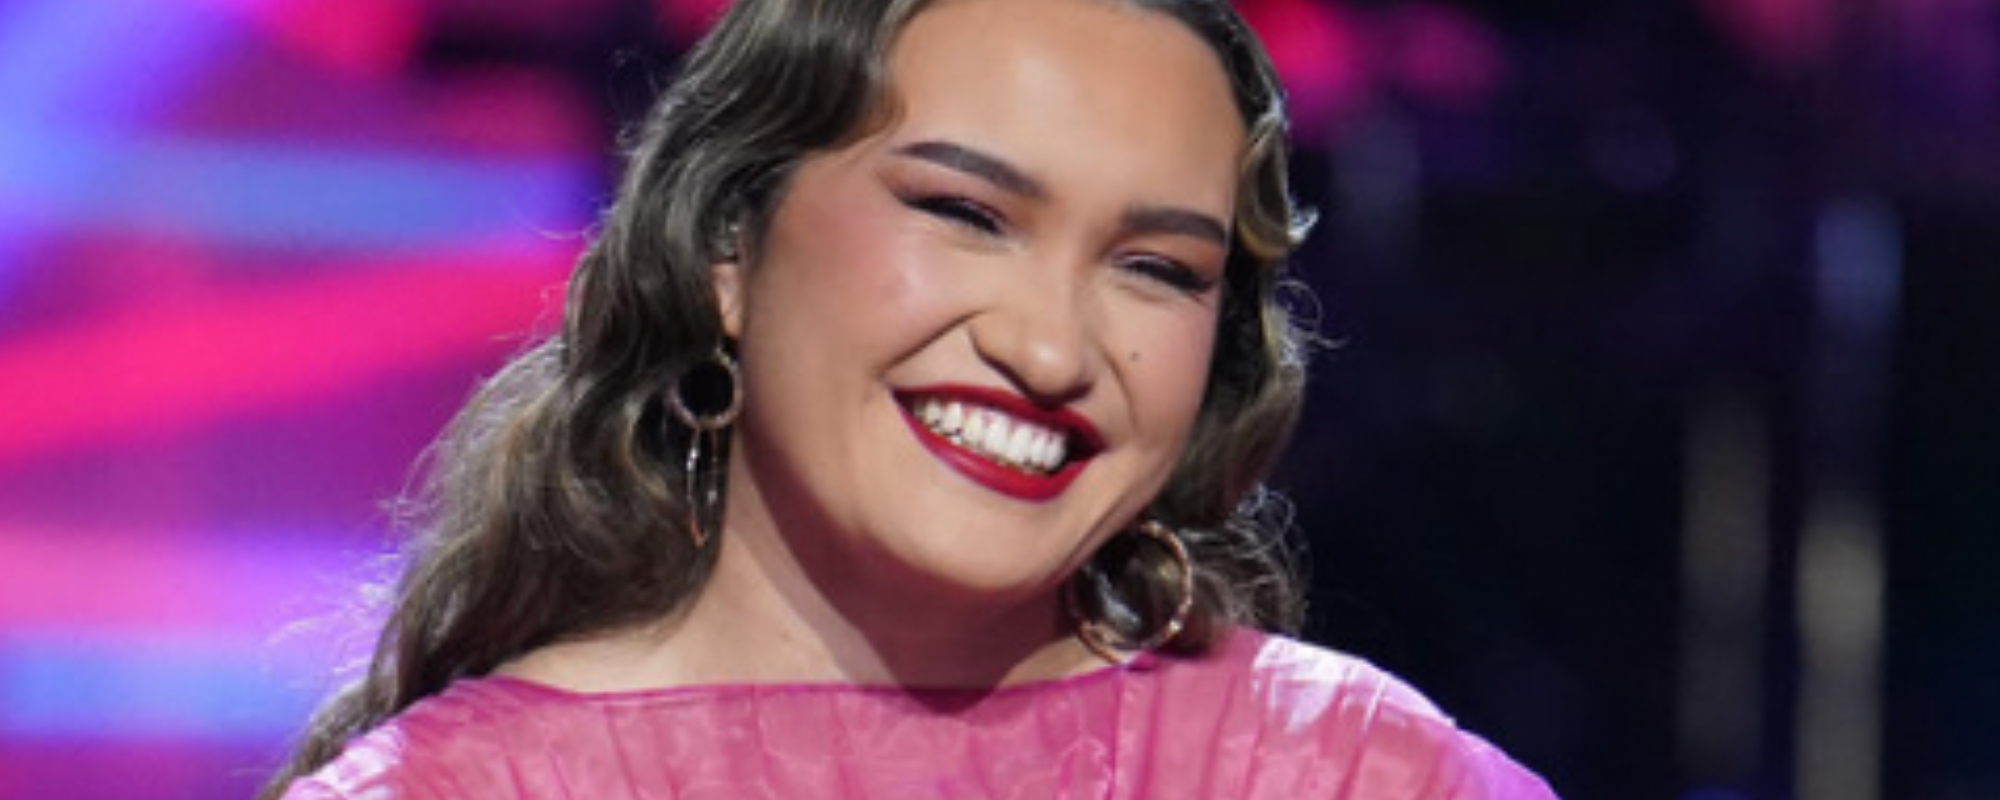 Kala Banham Finishes ‘The Voice’ With “Absolutely Perfect” Performance of “My Funny Valentine”